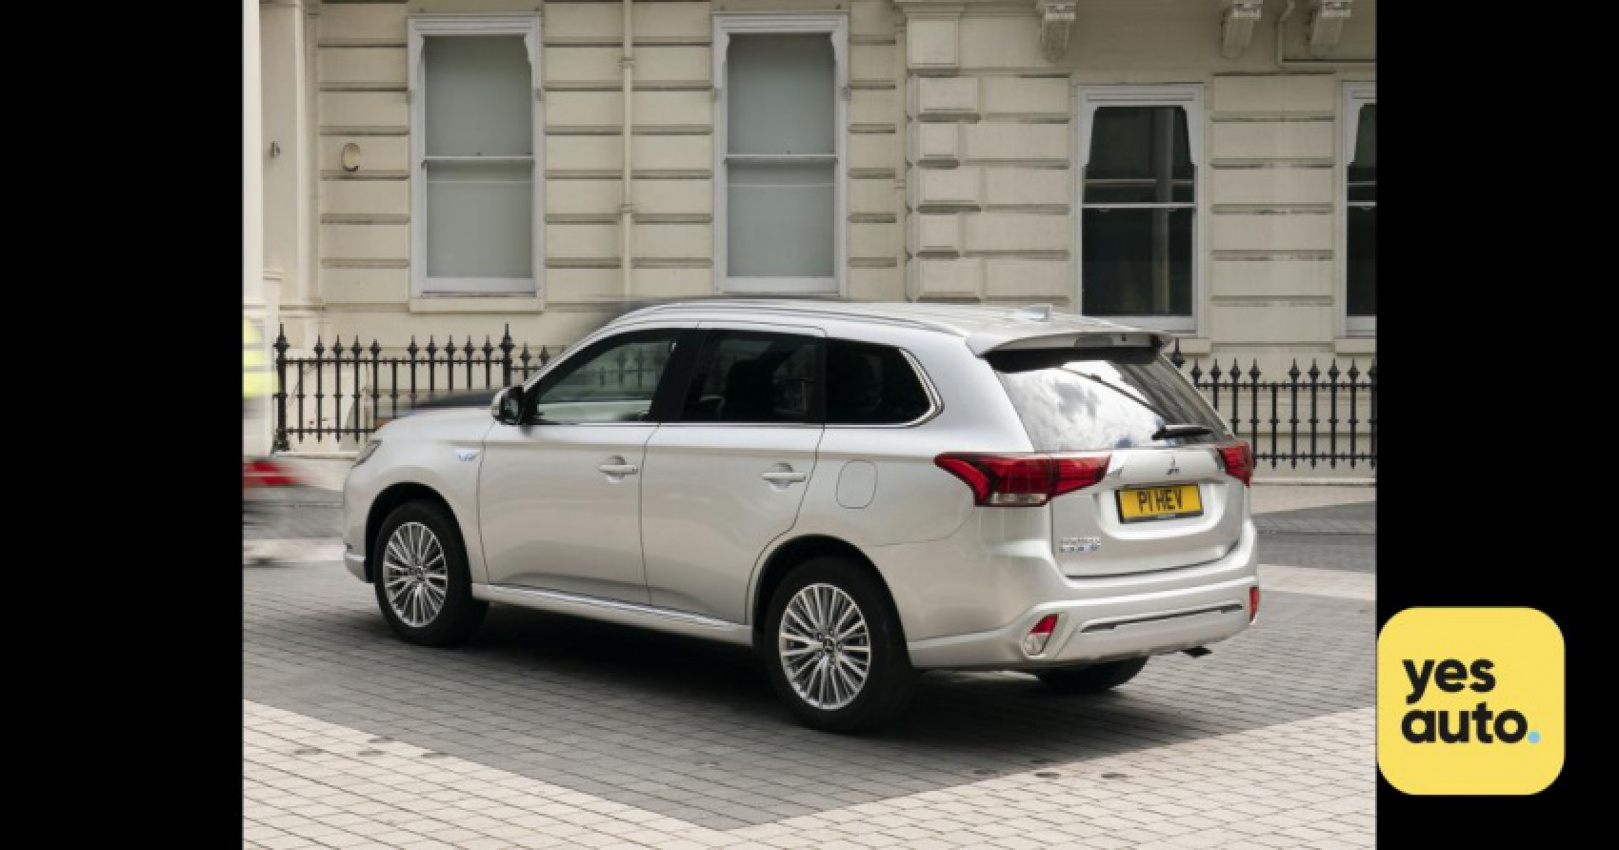 autos, cars, mitsubishi, car news, economical, review, “plug-in hybrids are important” says mitsubishi survey of mitsubishi plug-in hybrid drivers